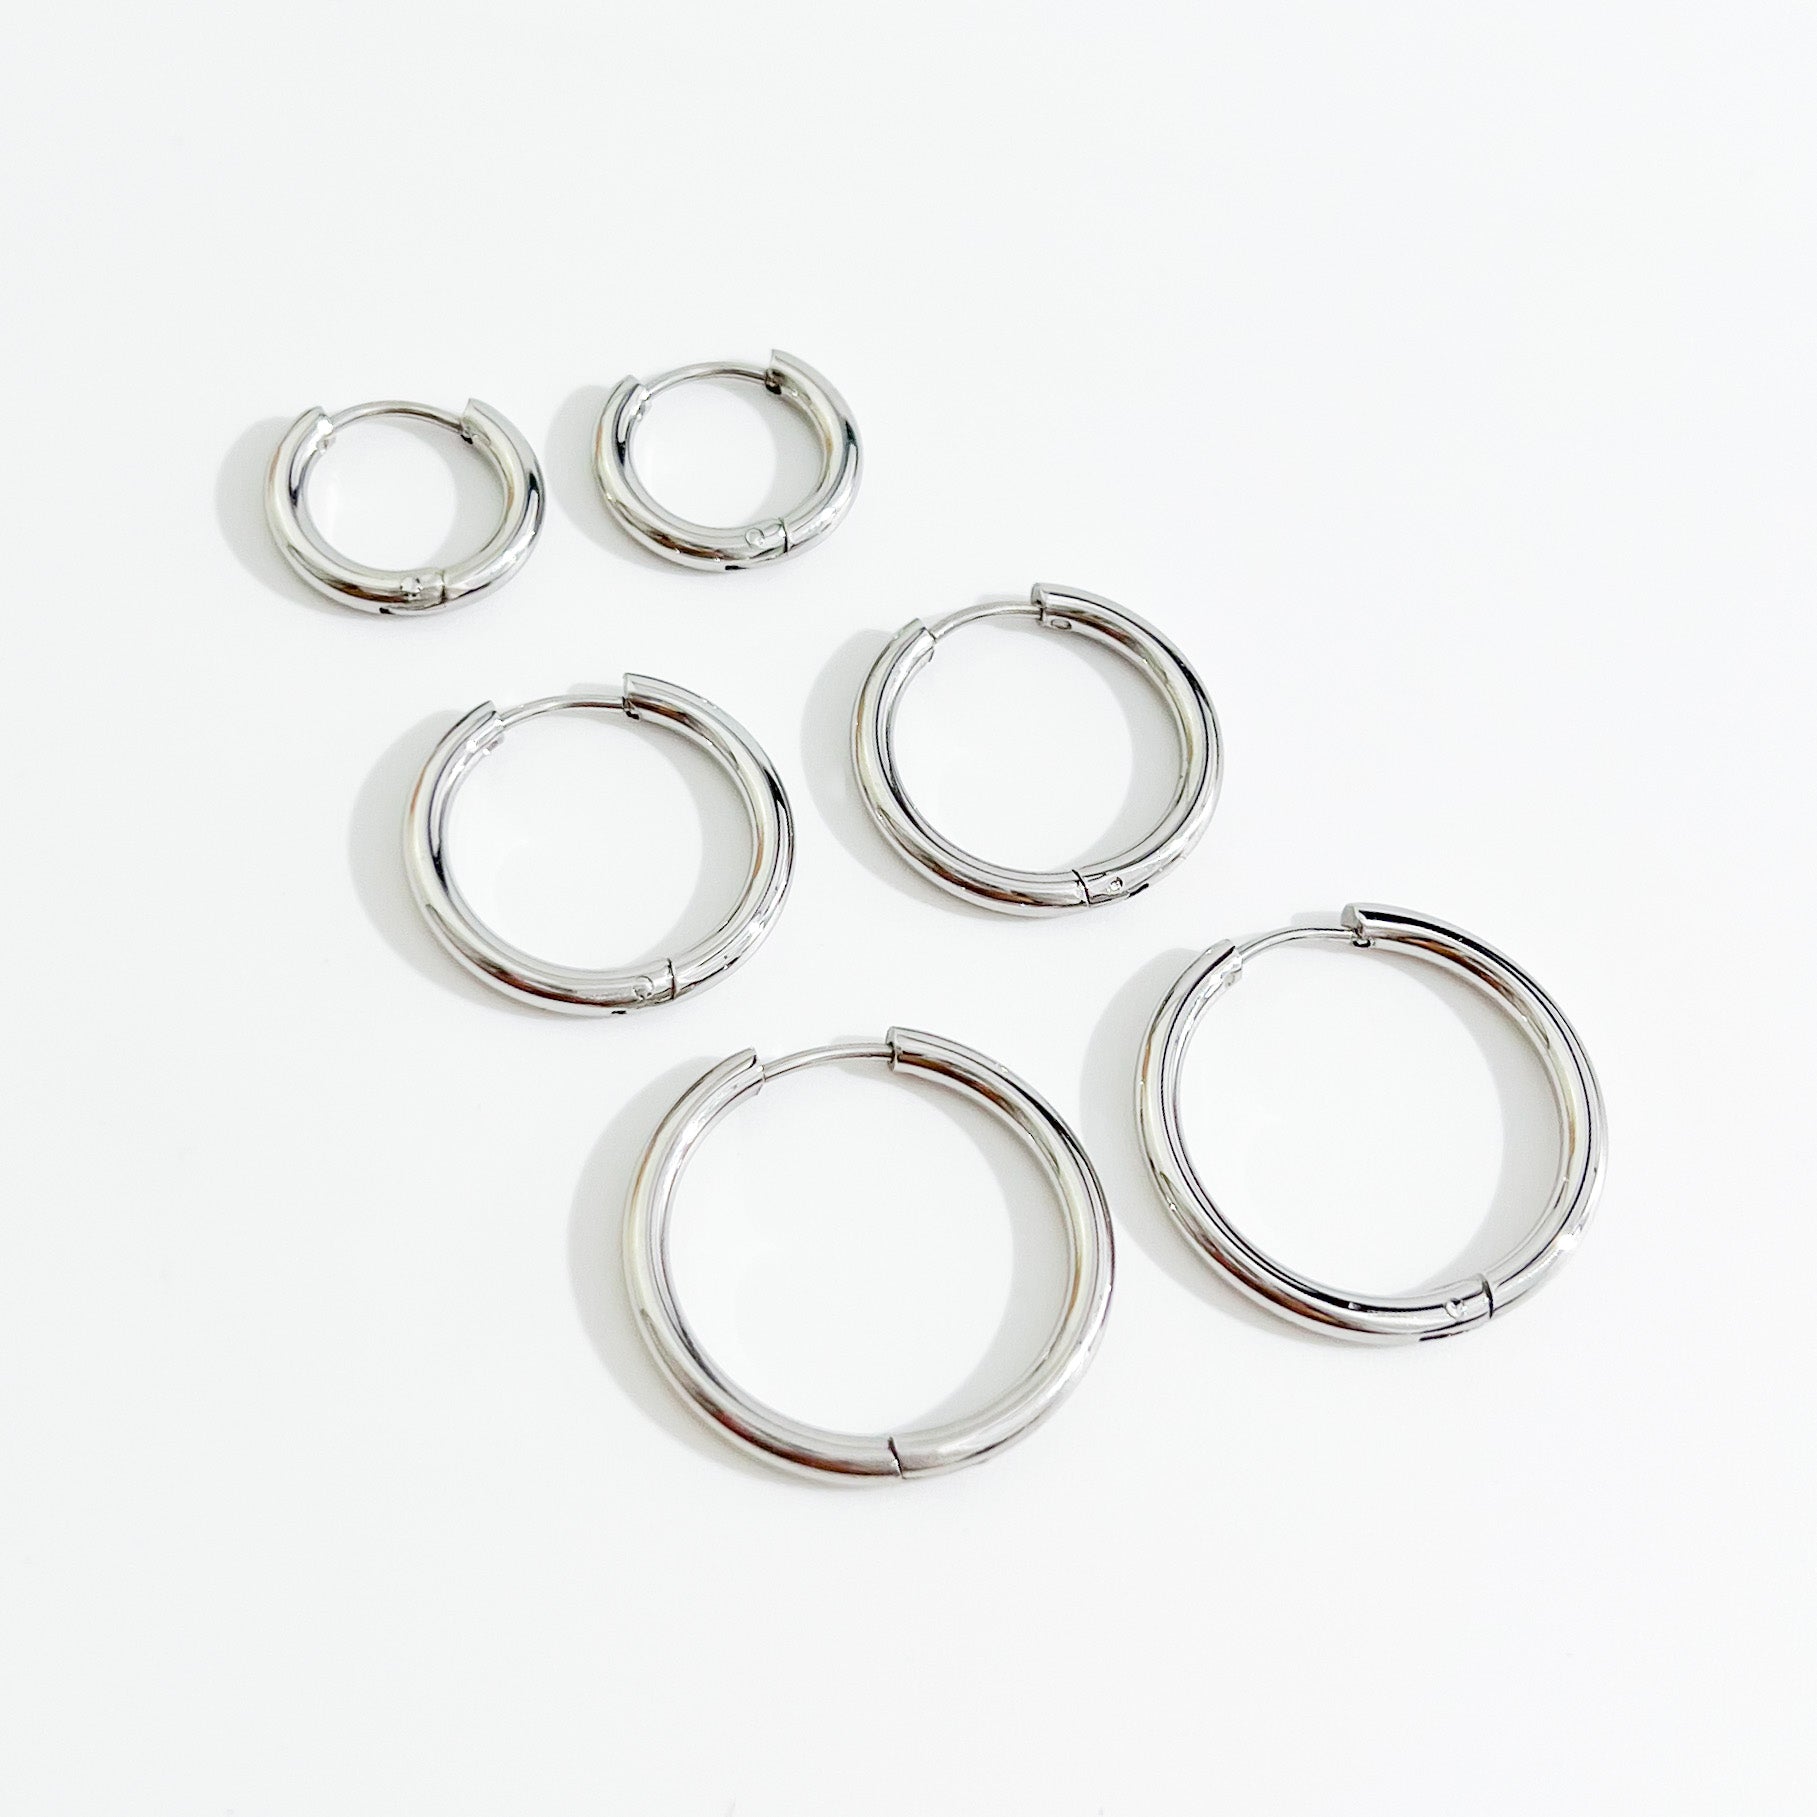 Regular Everyday Seamless Silver Hoops (2.5cm) - Flaire & Co.